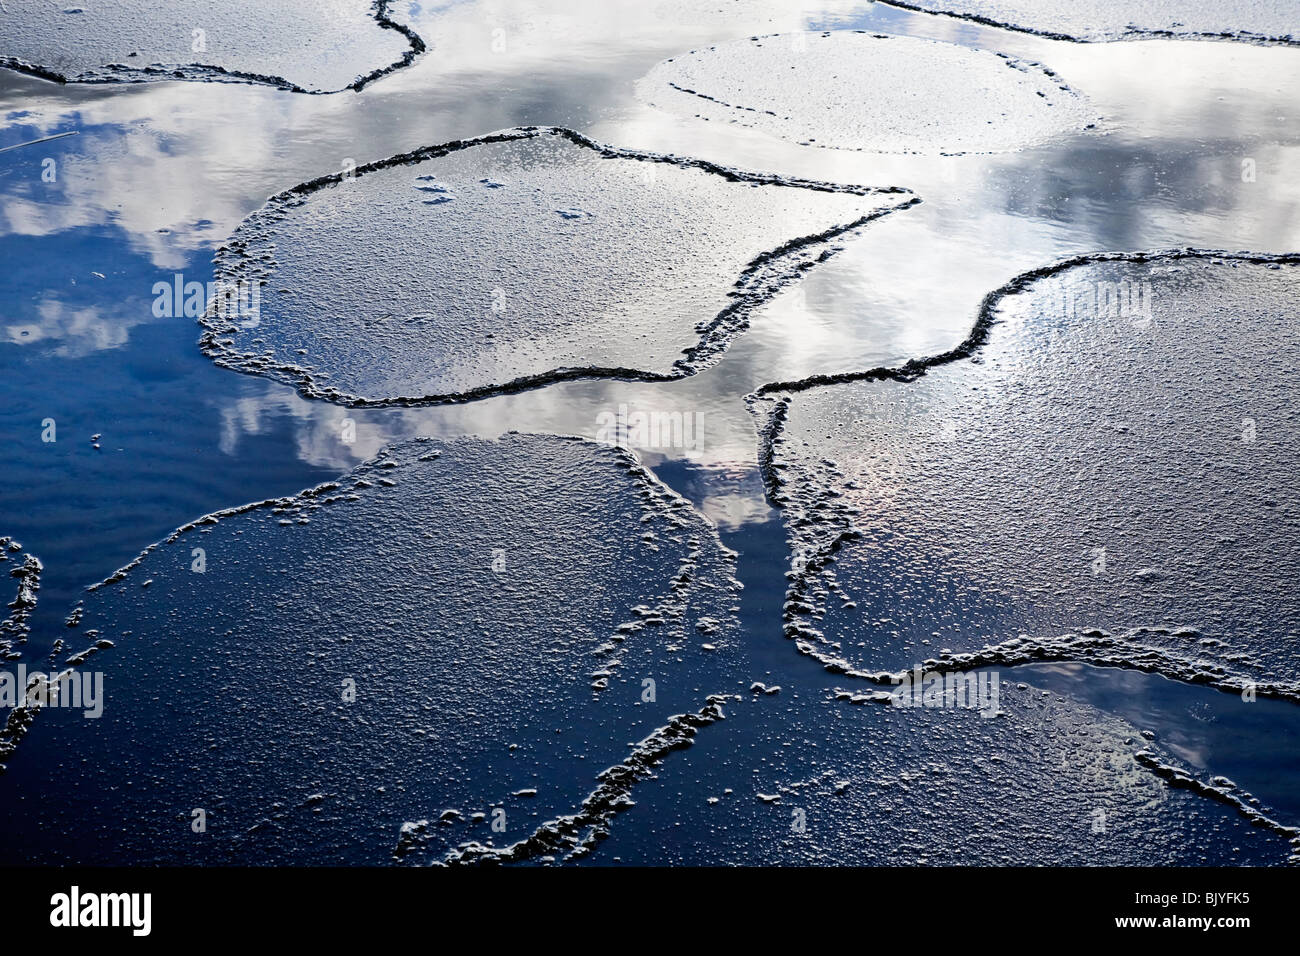 Thin ice breaking on a spring day, clouds and sky reflected in the